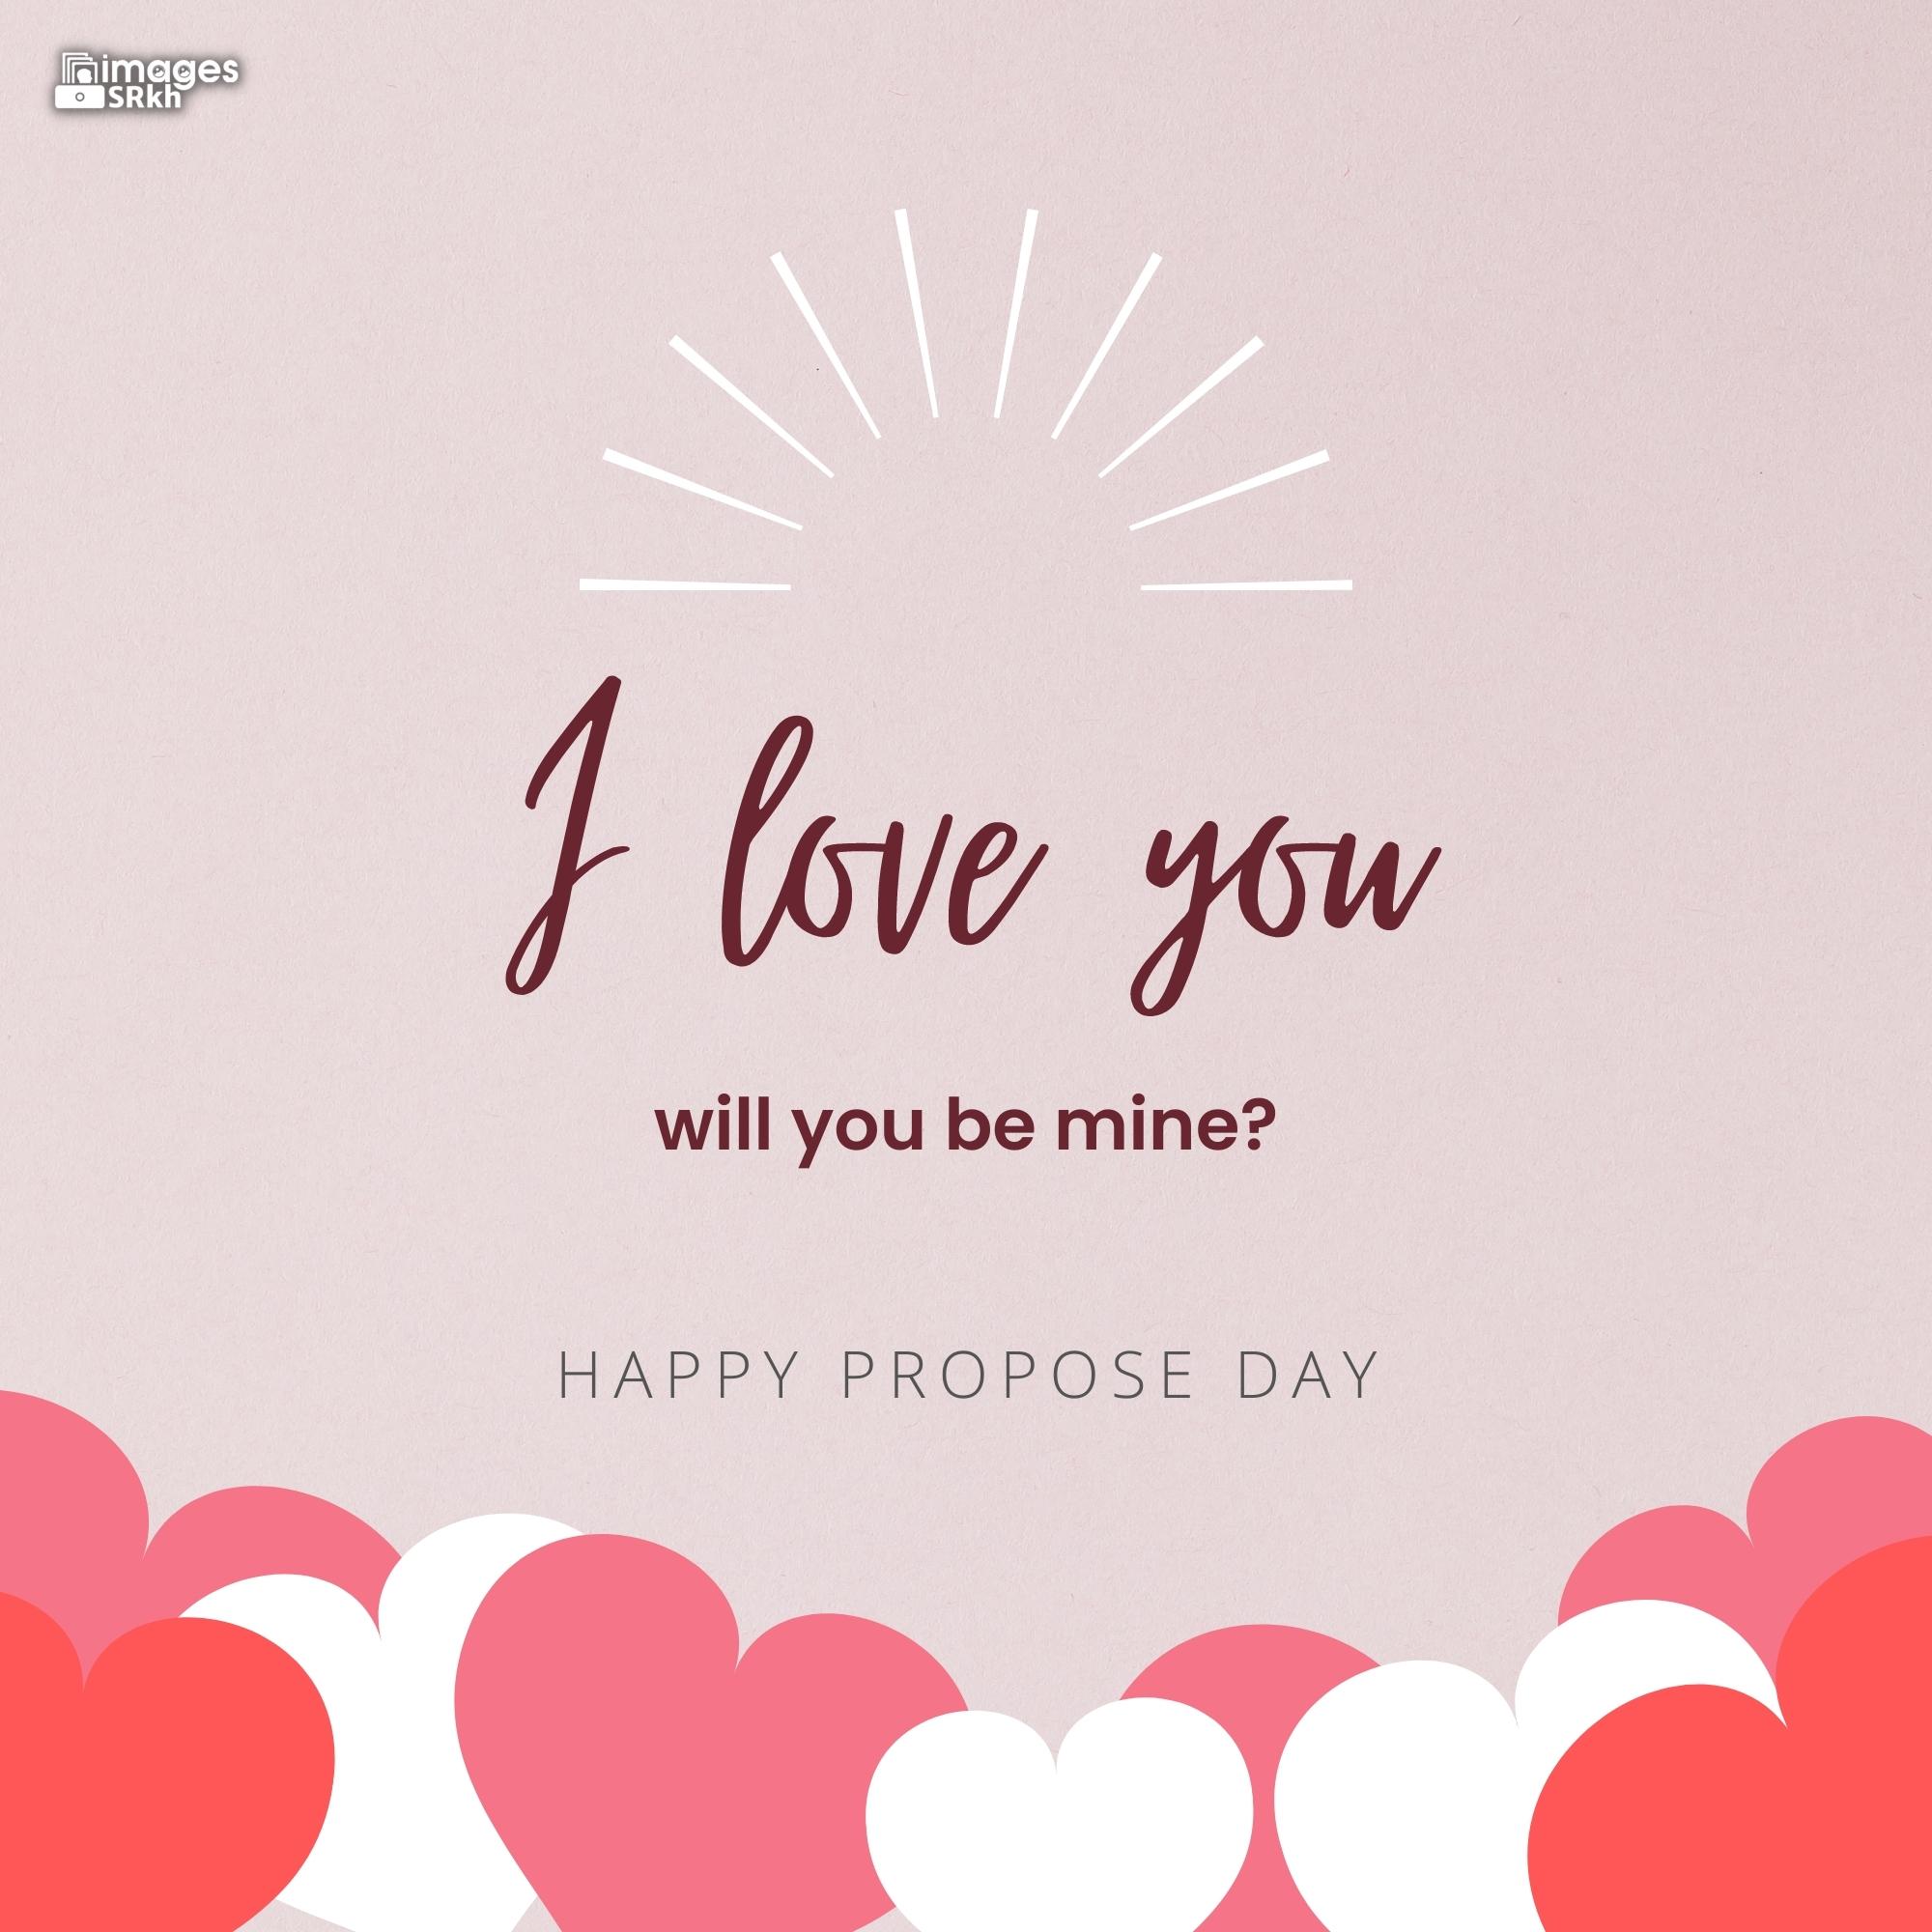 Happy Propose Day Images | 424 | I love you will you be mine